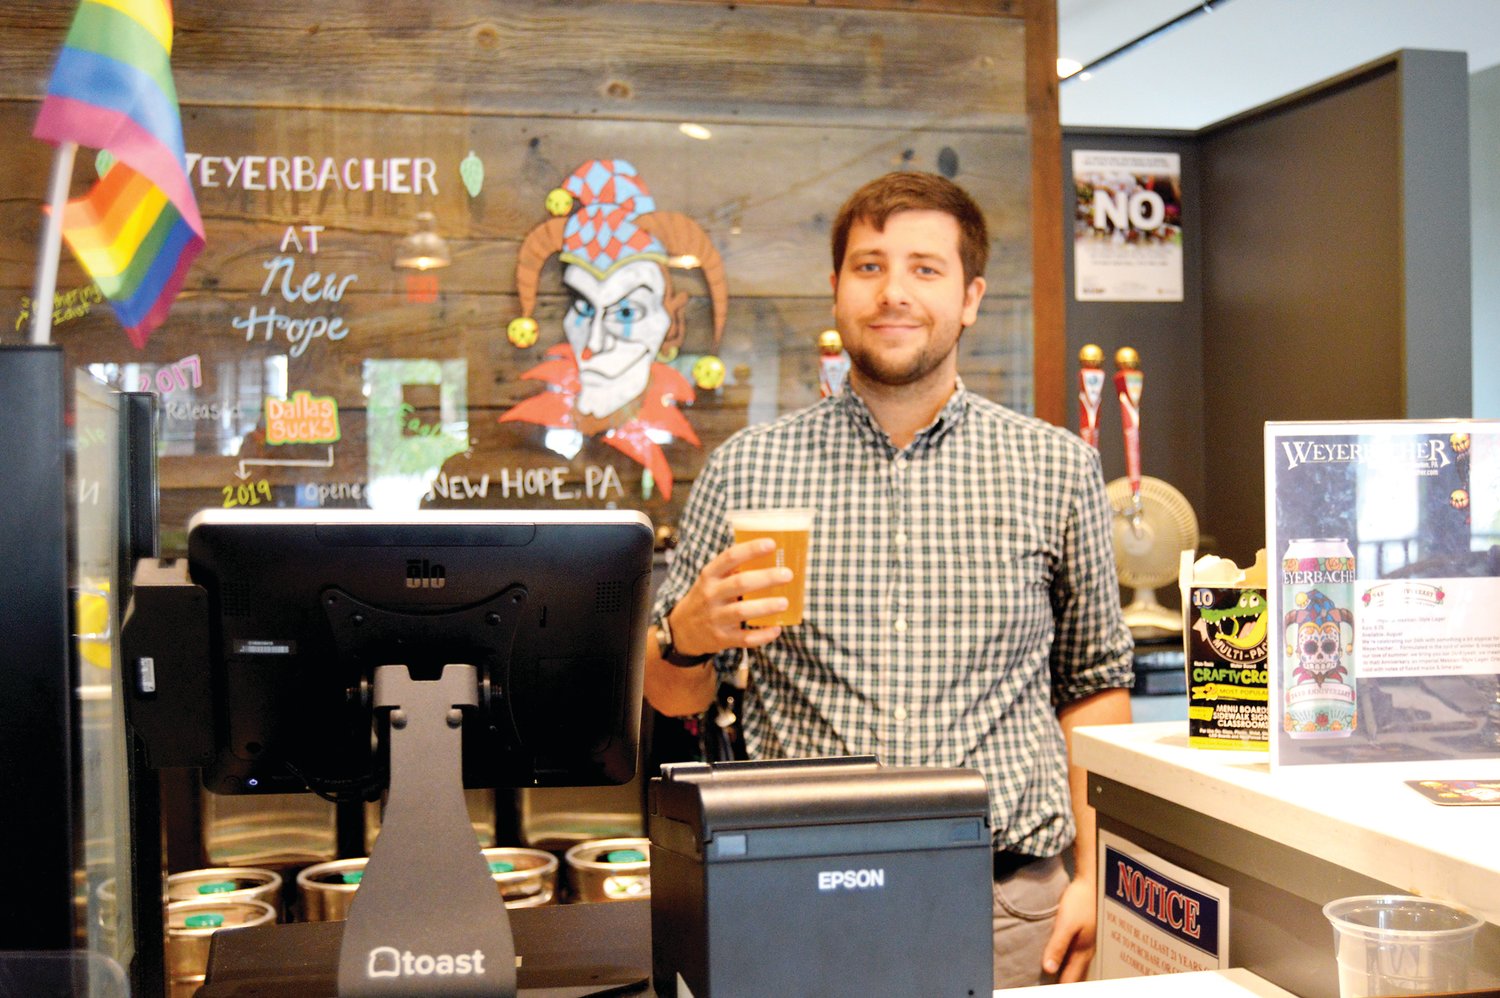 Joey Cooper is manager of the Tap Room at New Hope, the first satellite site for Weyerbacher Brewing Co. of Easton.